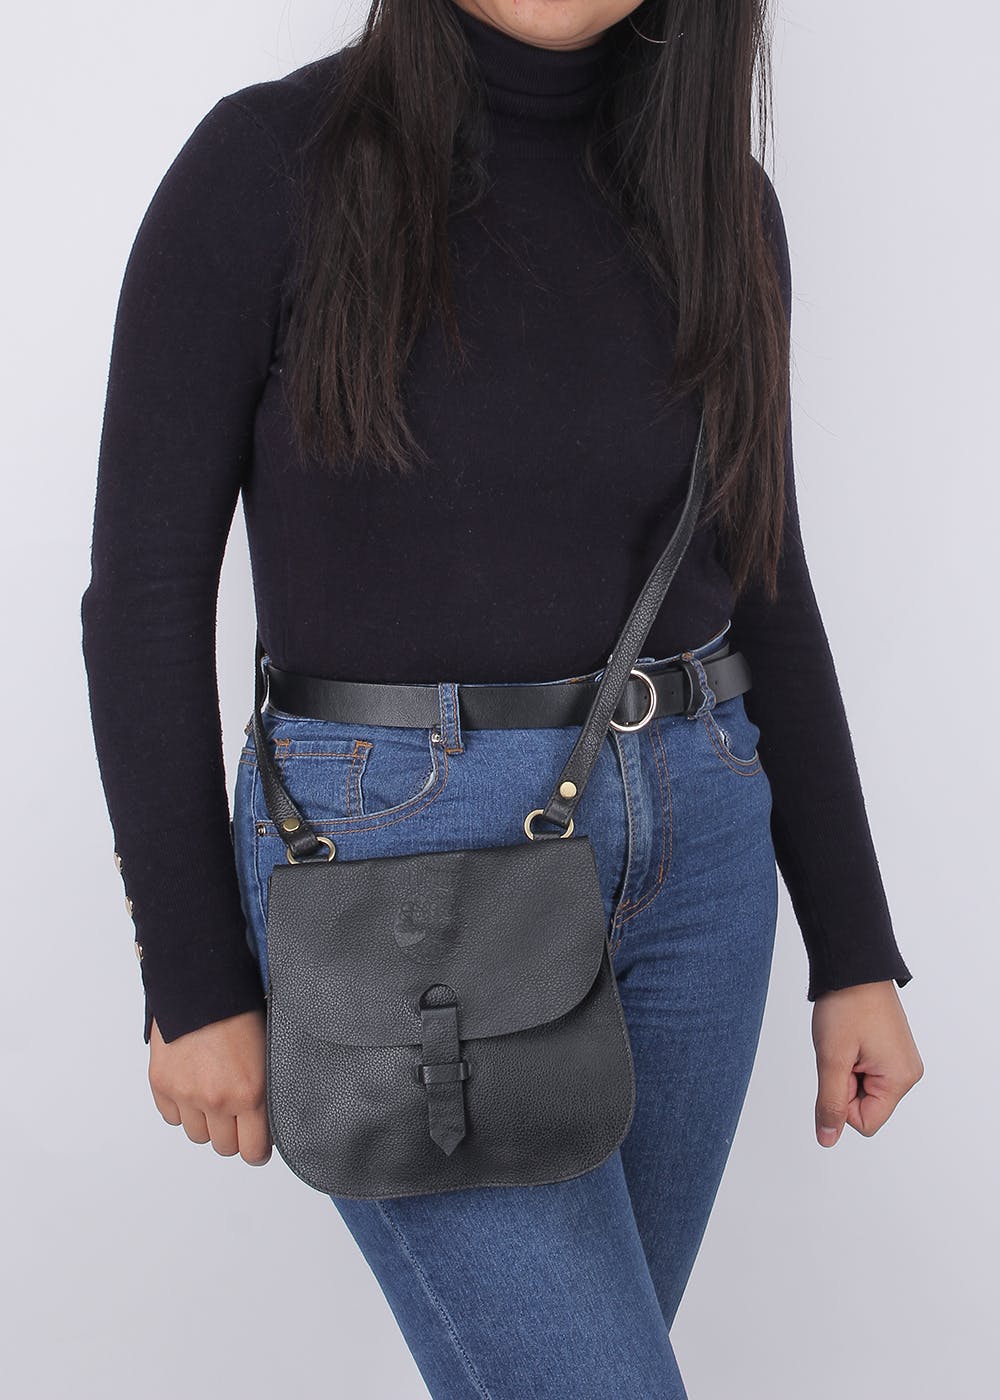 Overlay Flap Detail Solid Cross-Body